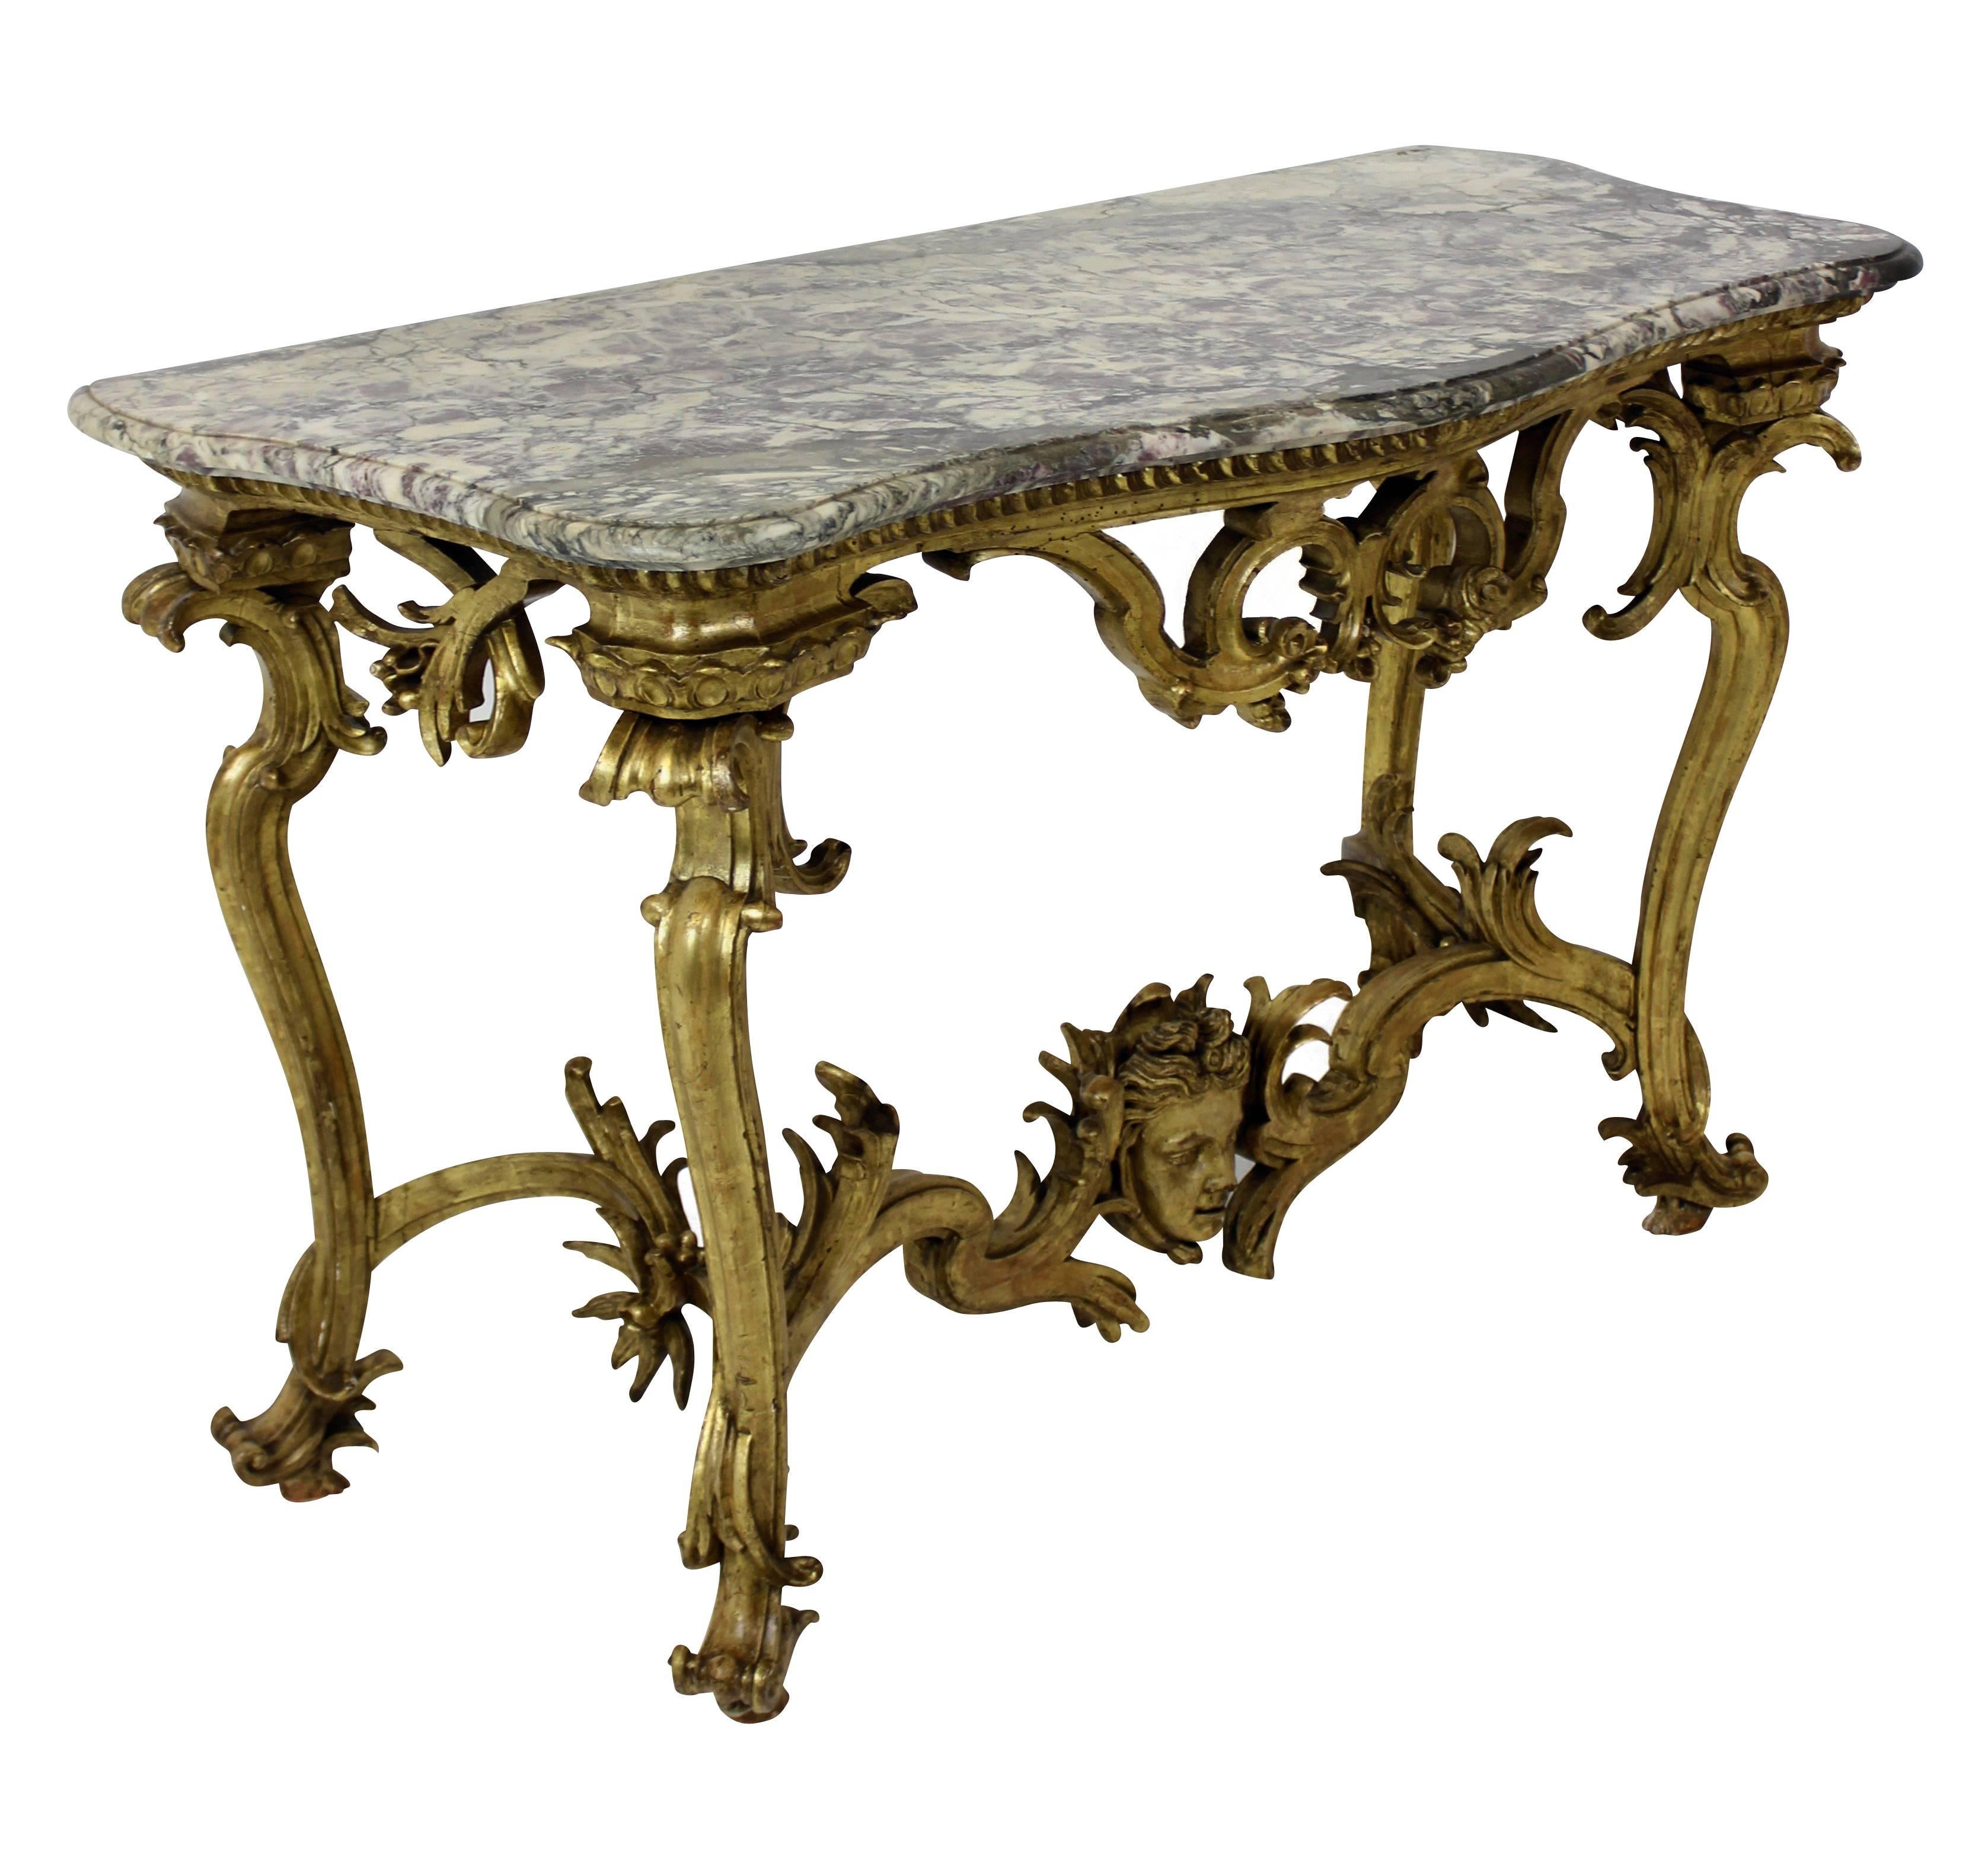 An exceptional George II giltwood console table, purchased in circa 1790 for the newly built Knocklofty House, Tipperary for the Earl of Donoughmore. It has remained in this splendid Georgian house until now, in the family wing and we purchased it